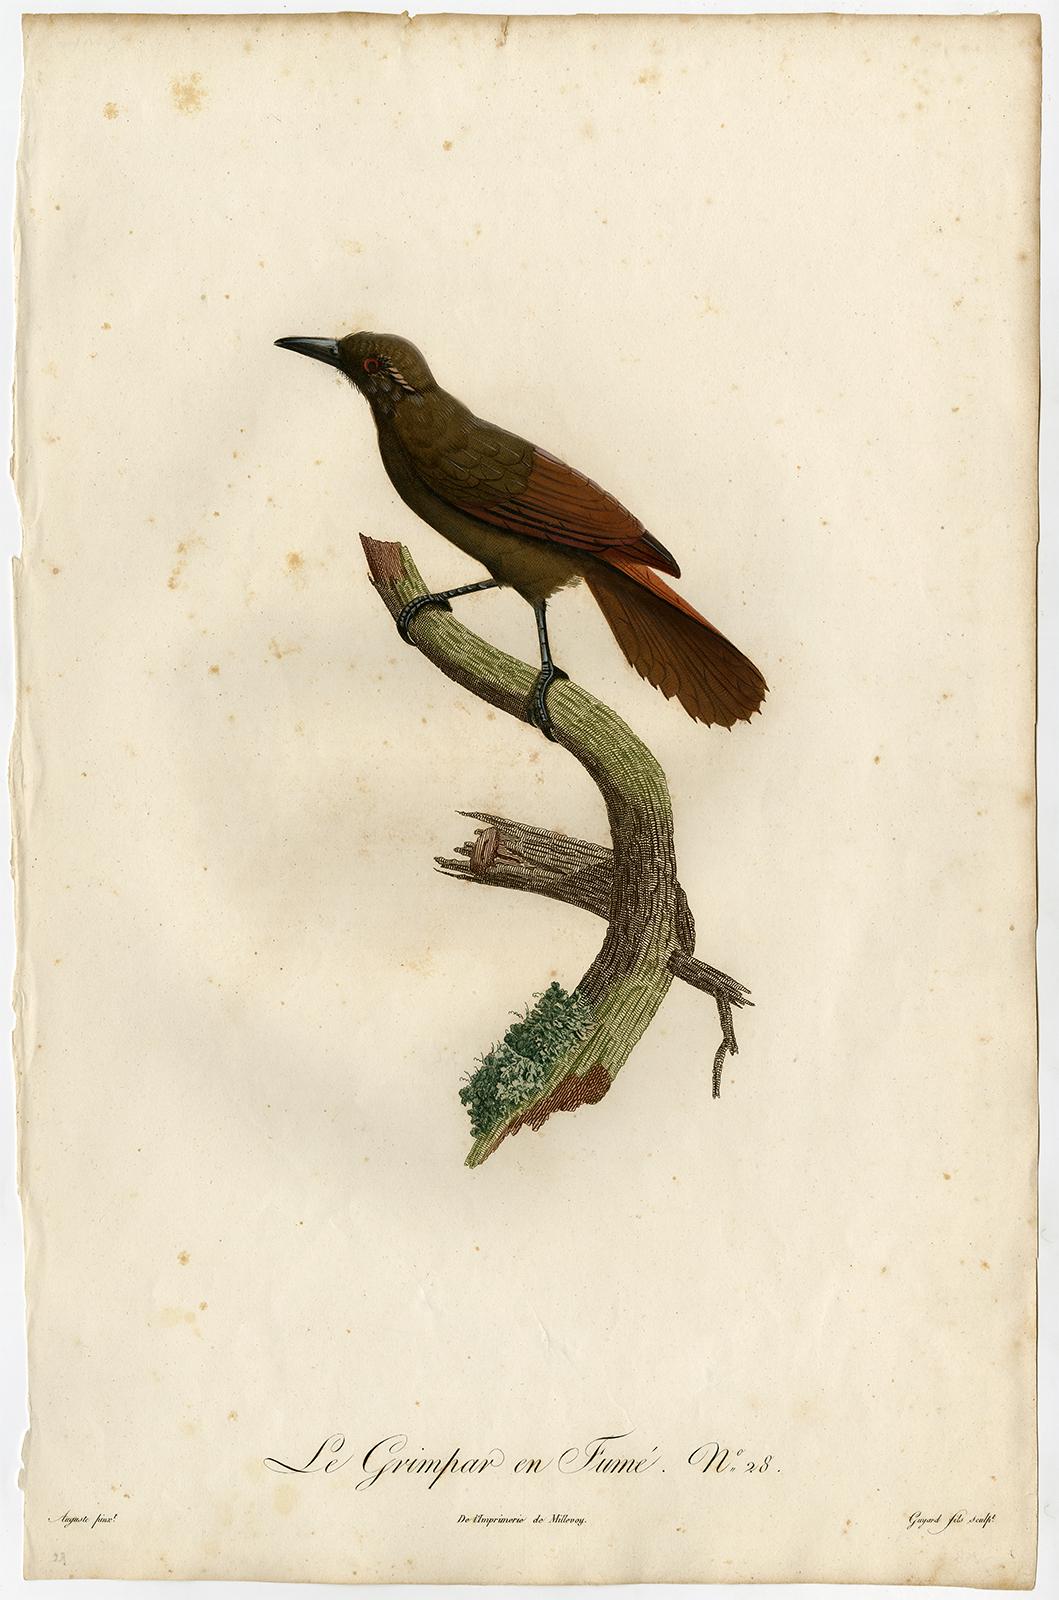 Jacques Barraband Animal Print - A woodcreeper bird species by Barraband - Hand coloured etching - 19th century